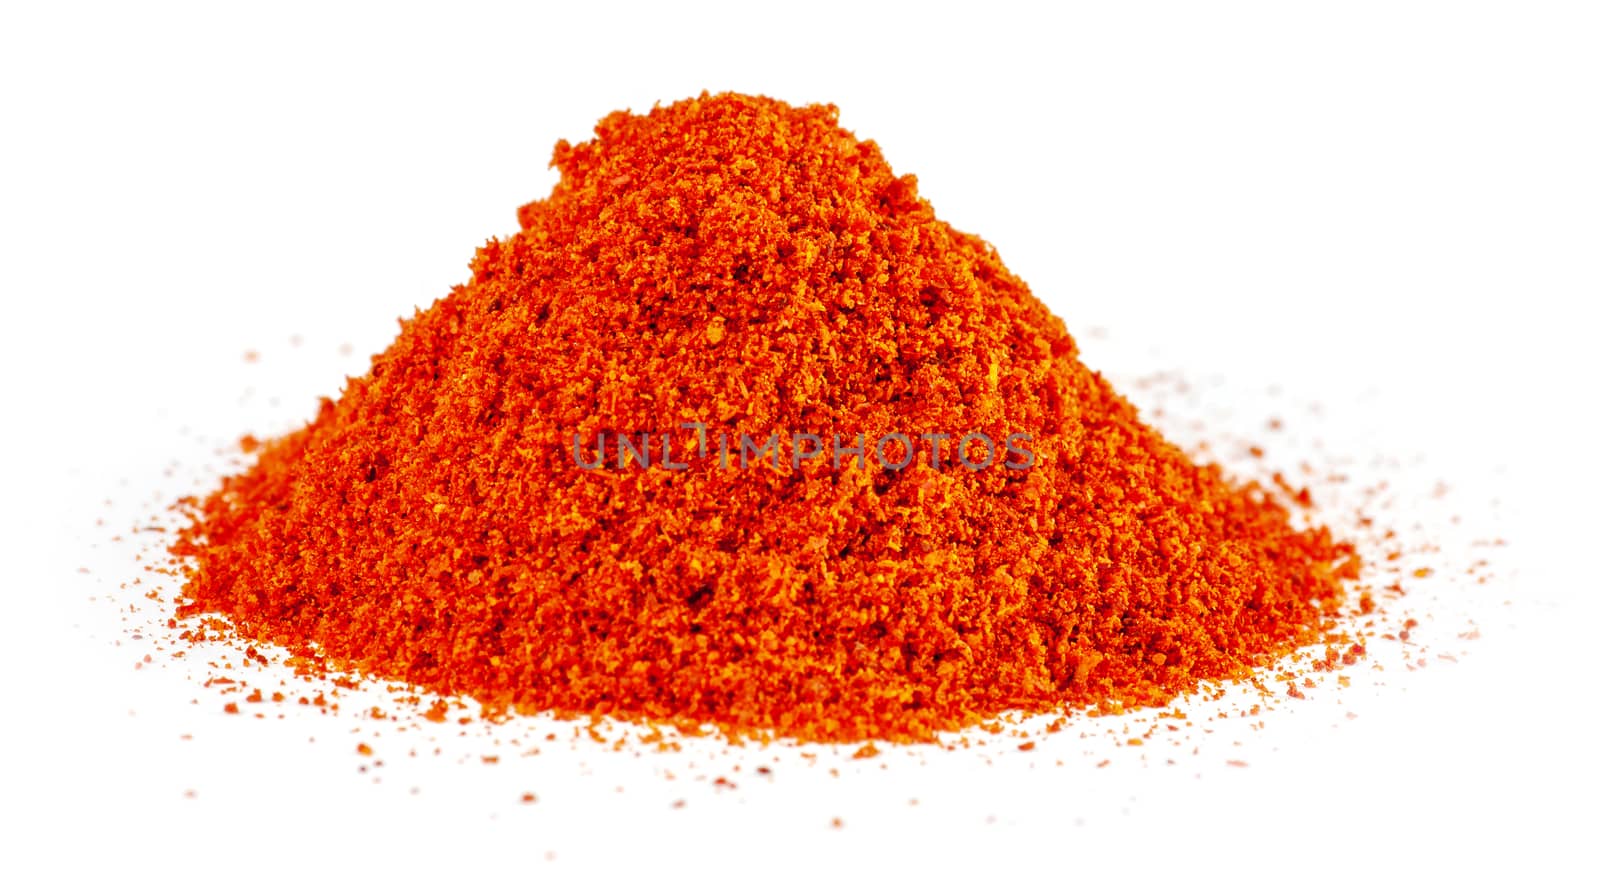 Pile of red pepper powder by red2000